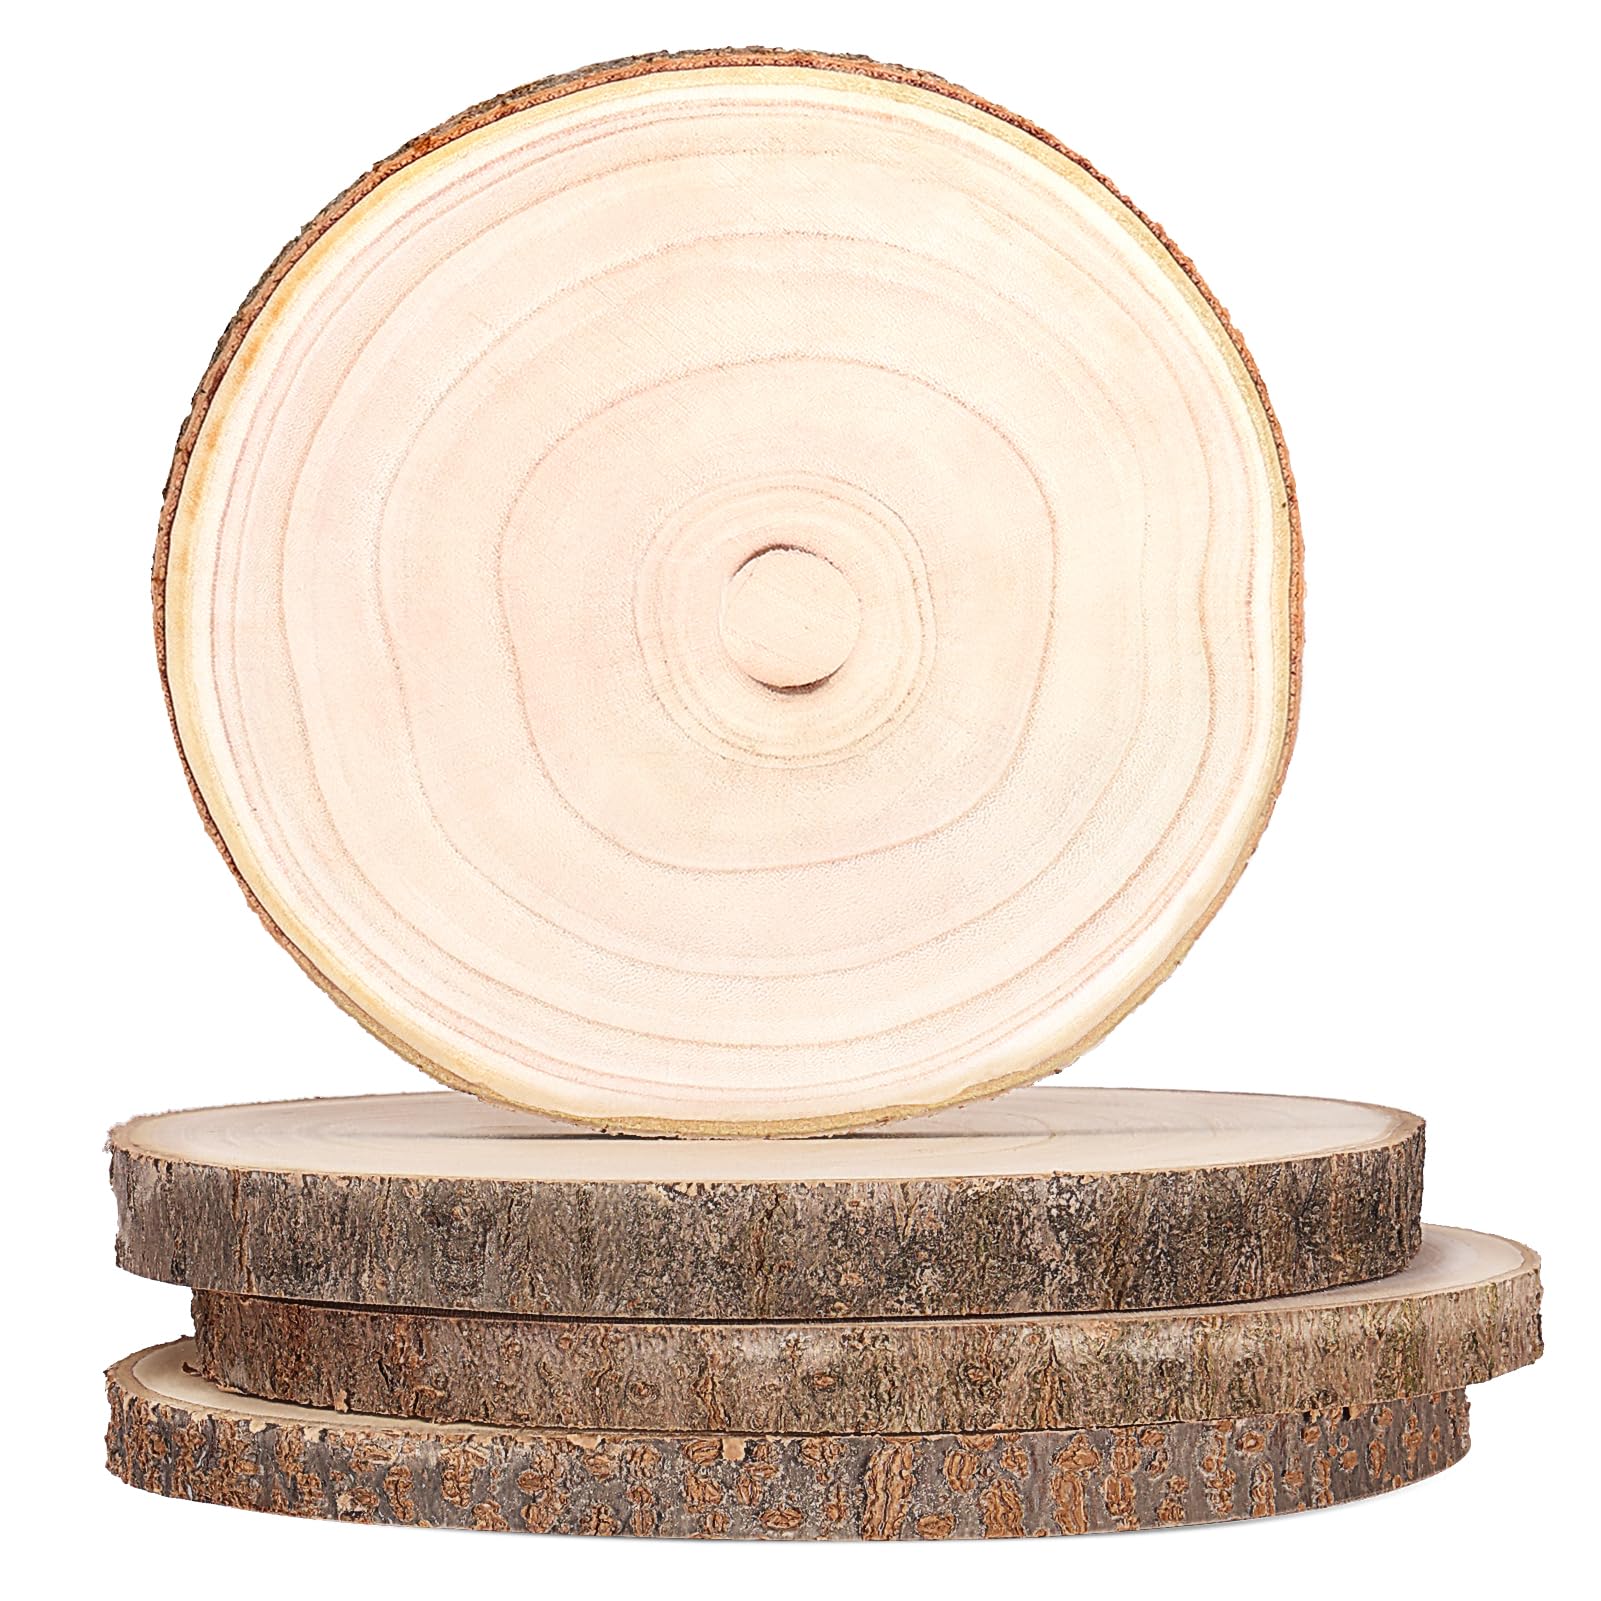  Caydo 10 Pieces 11-12 Inch Wood Slices for Centerpieces with 10  PCS Wood Table Number Holders and 10 PCS Card for Wedding Table Centerpiece  Decoration, Woodland Themed Parties, Baby Showers